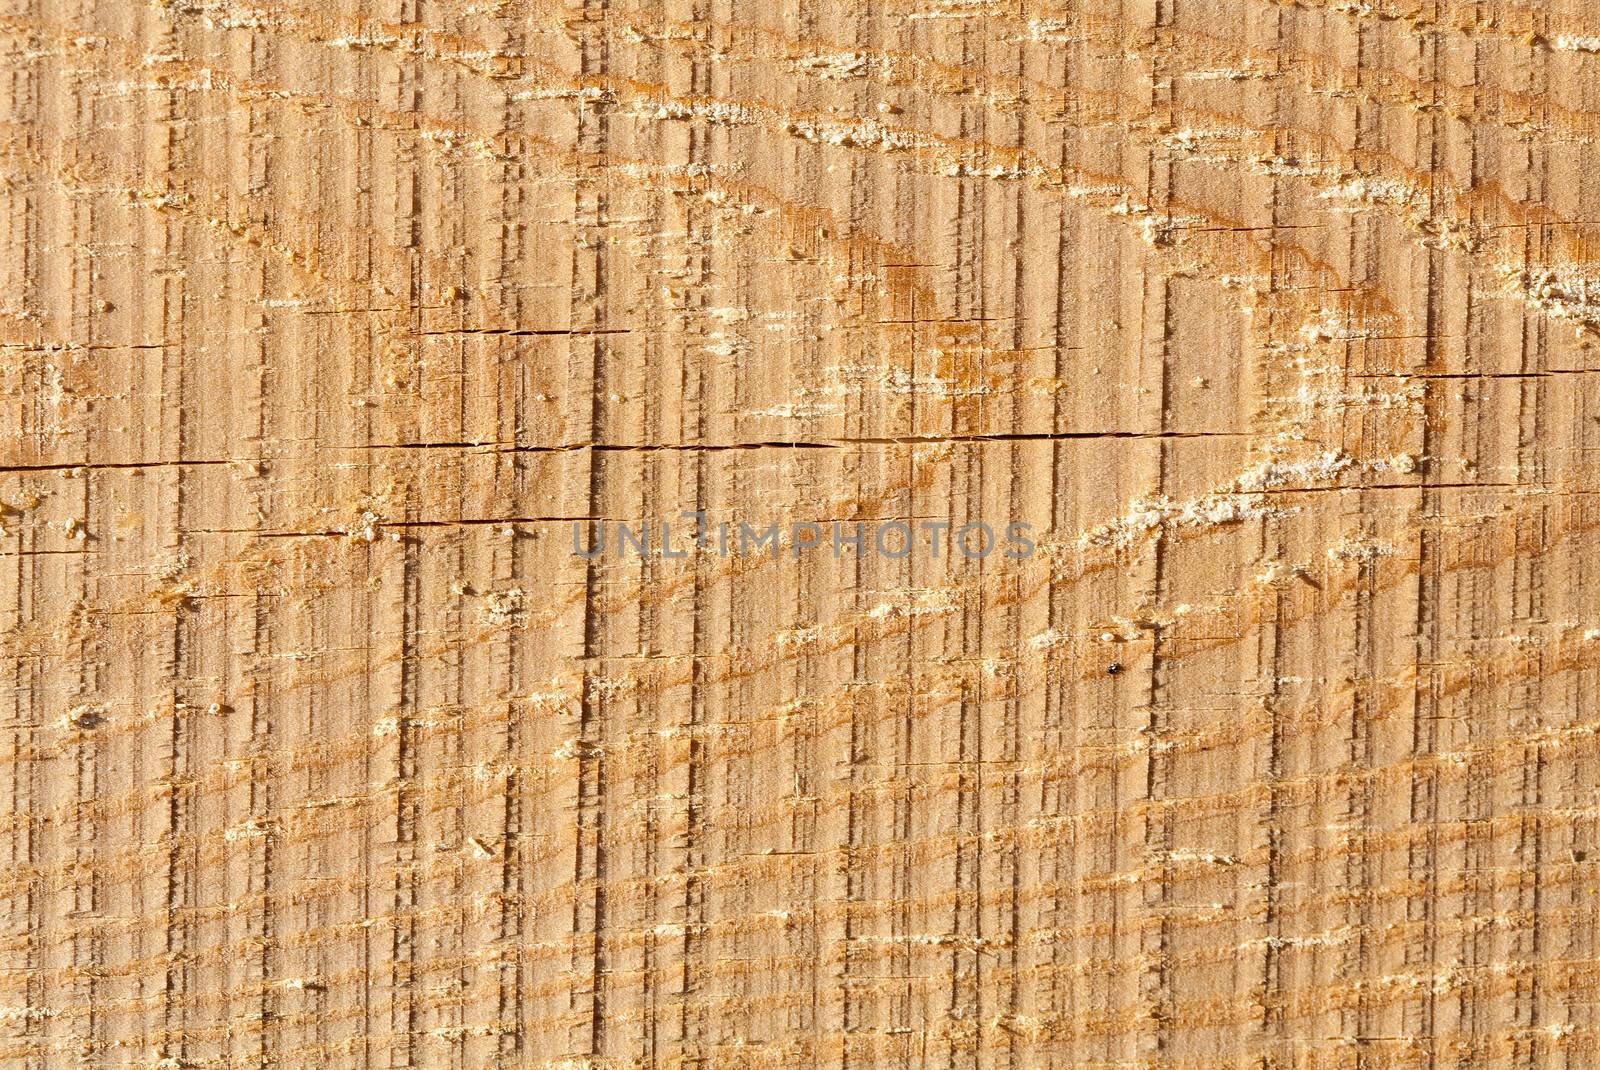 Texture of wood pattern background, low relief texture